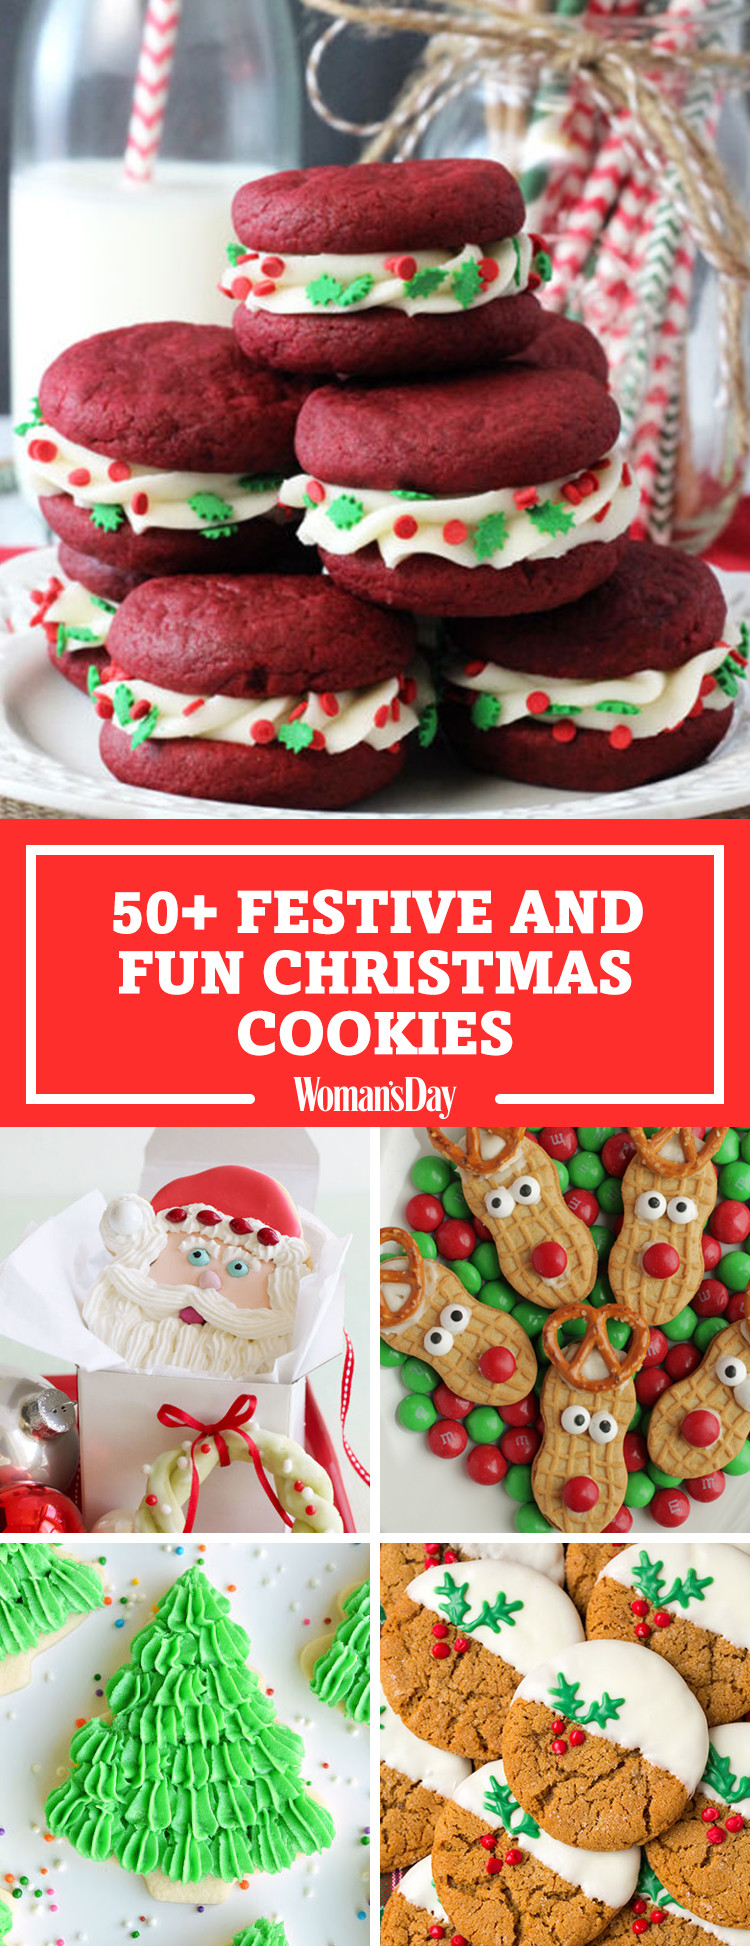 Fun Easy Christmas Cookies
 59 Easy Christmas Cookies Best Recipes for Holiday